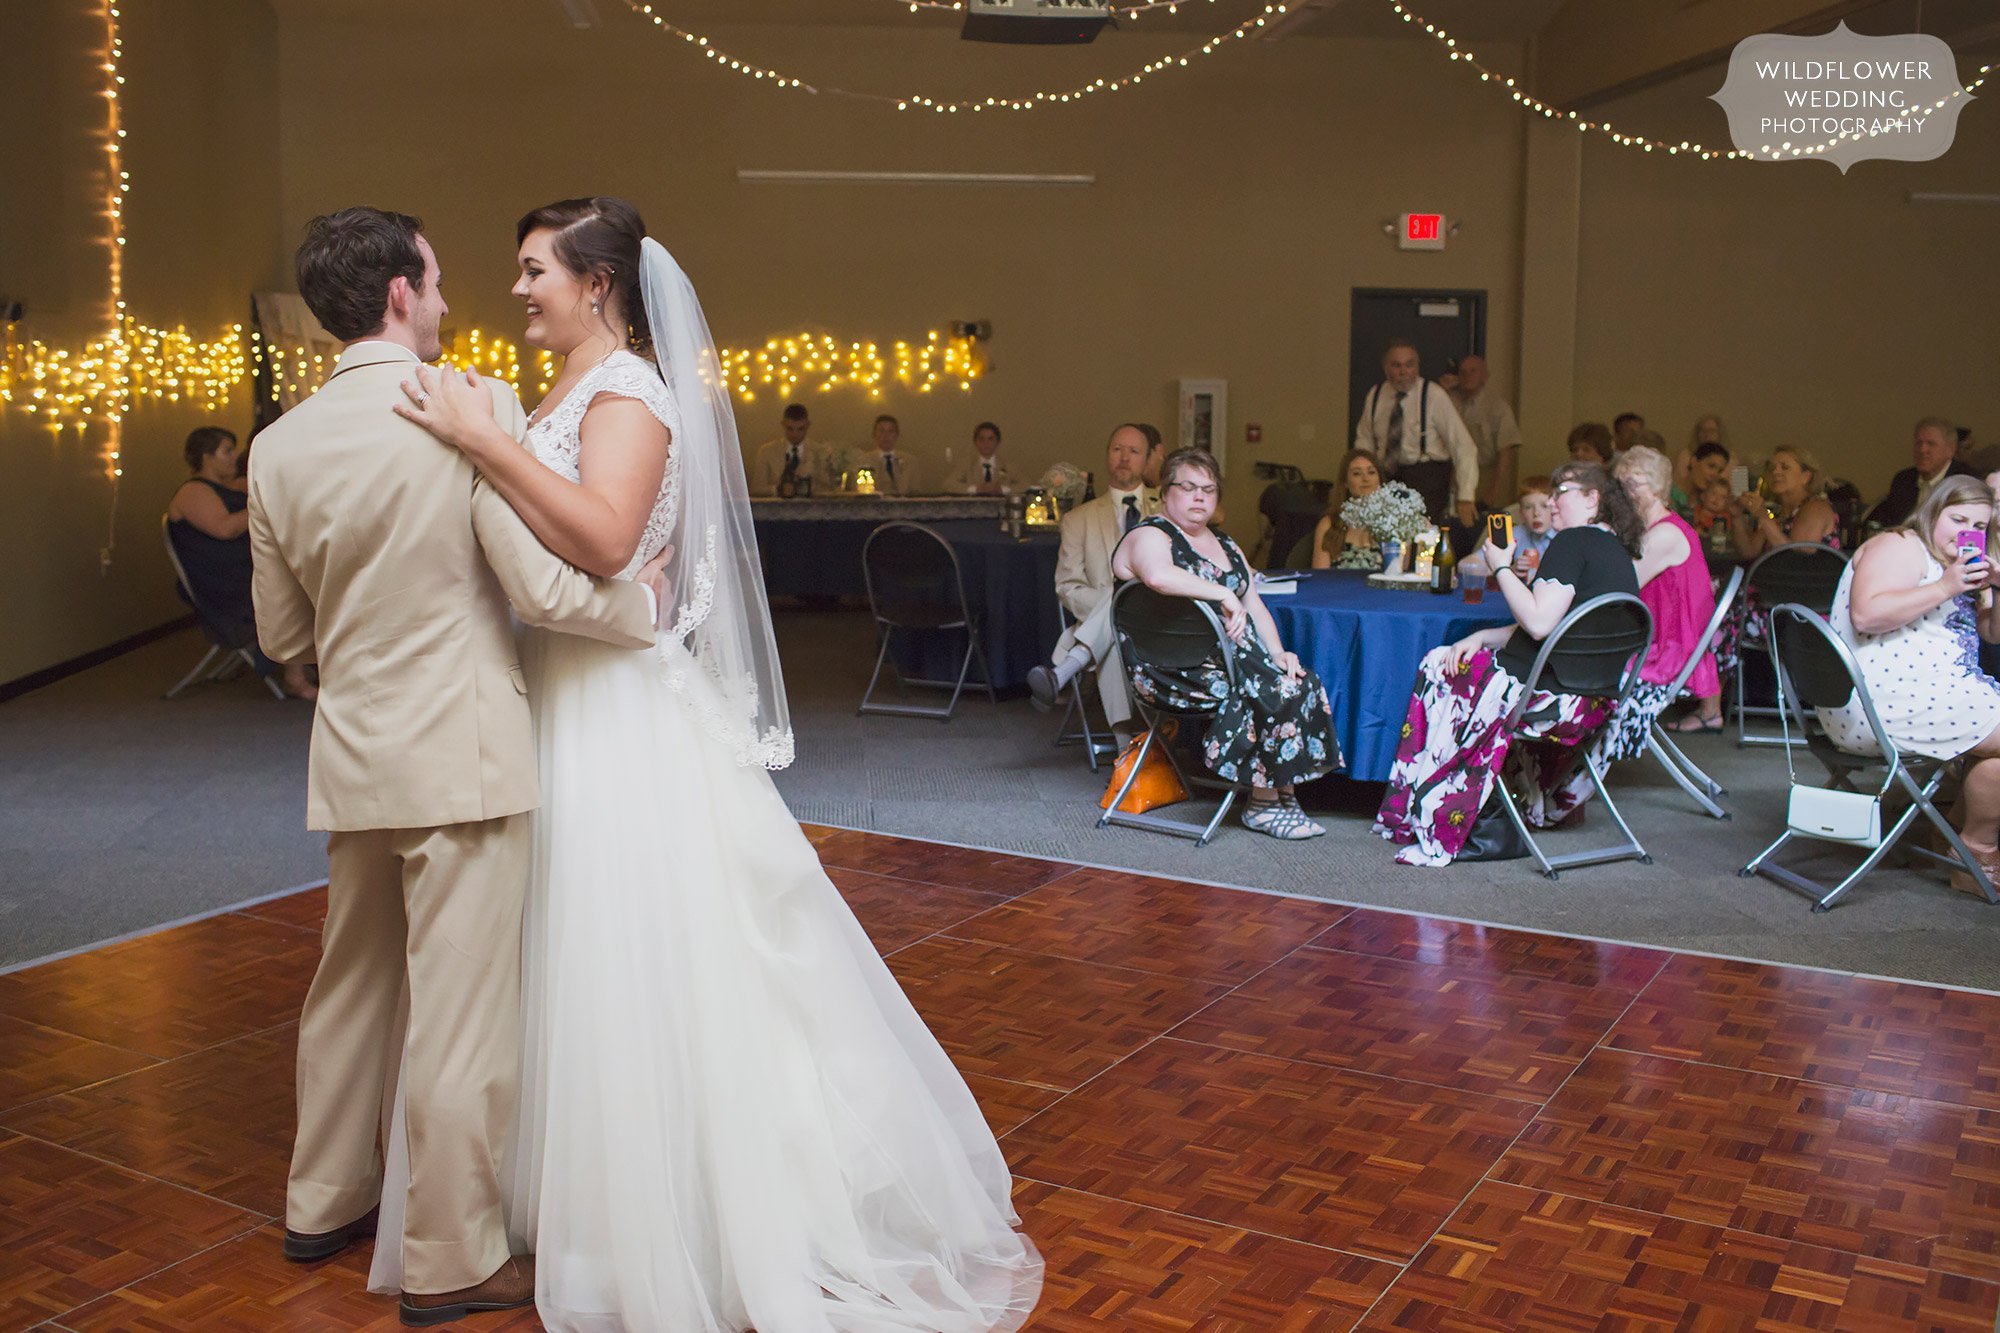 Bride and groom have their first dance at the Bradford Research Farm in Columbia, MO.